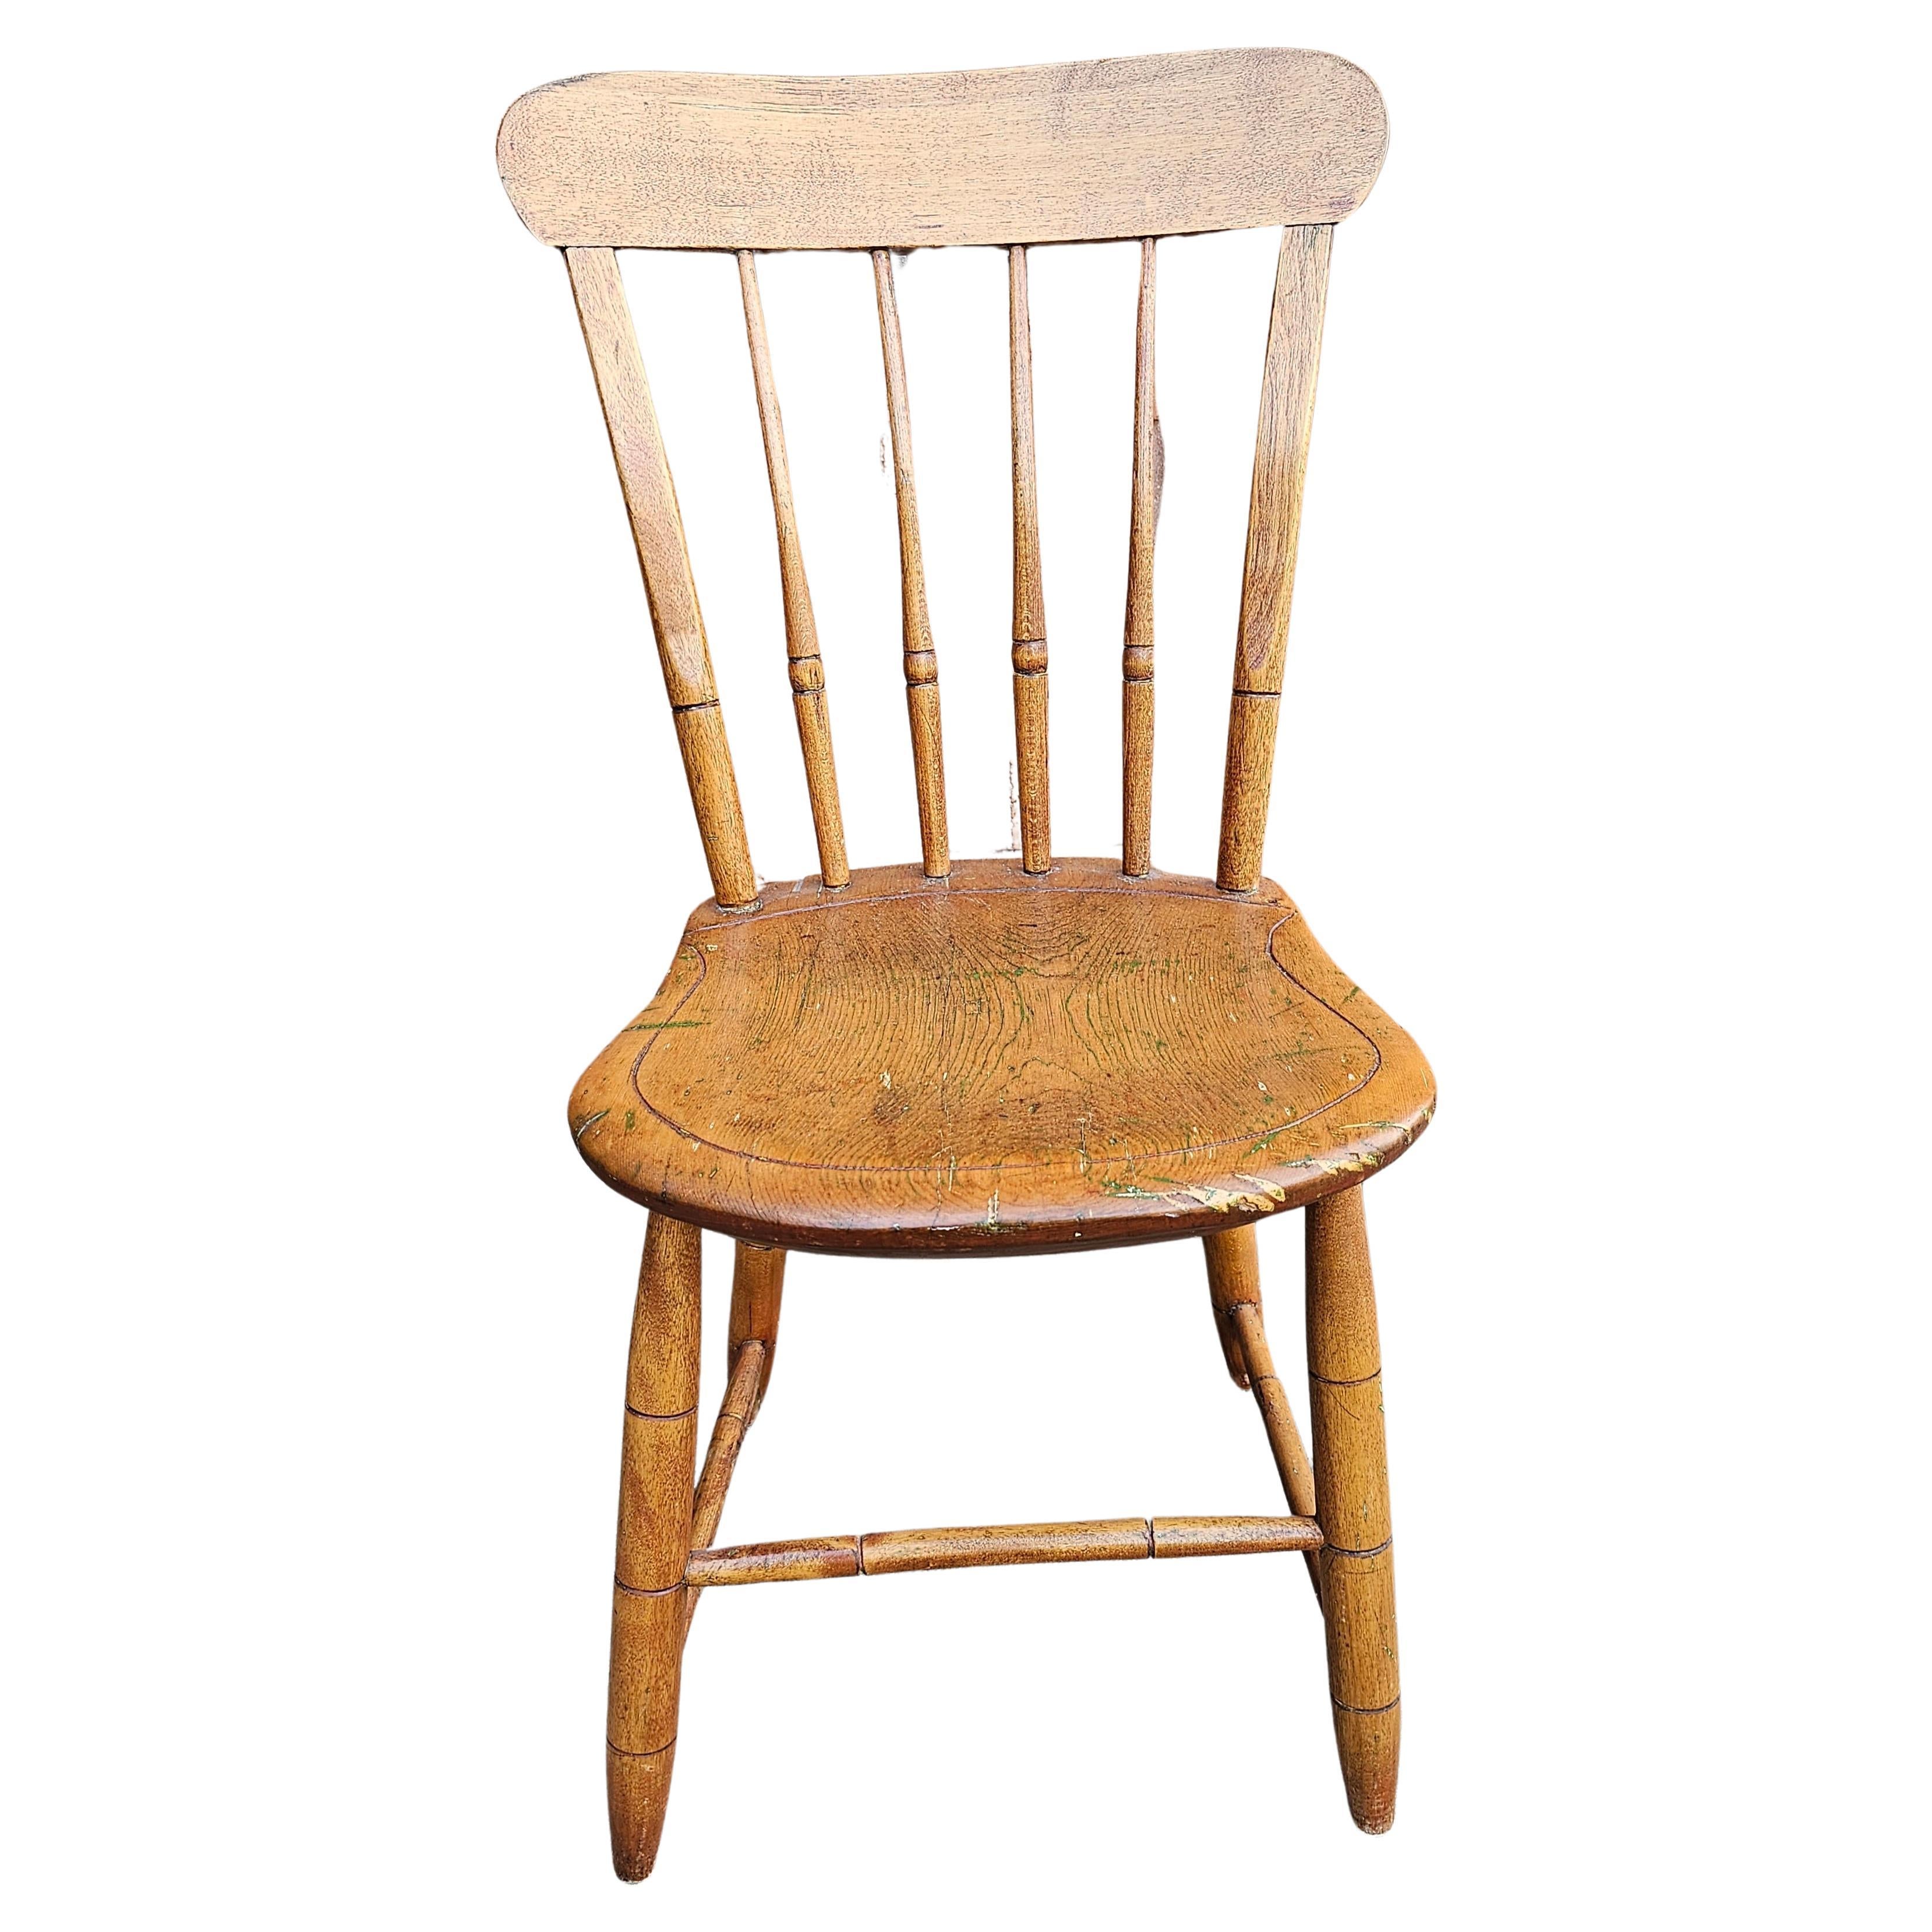 Early American Patinated Maple Plank  Side Chair, Circa Early 20th Century For Sale